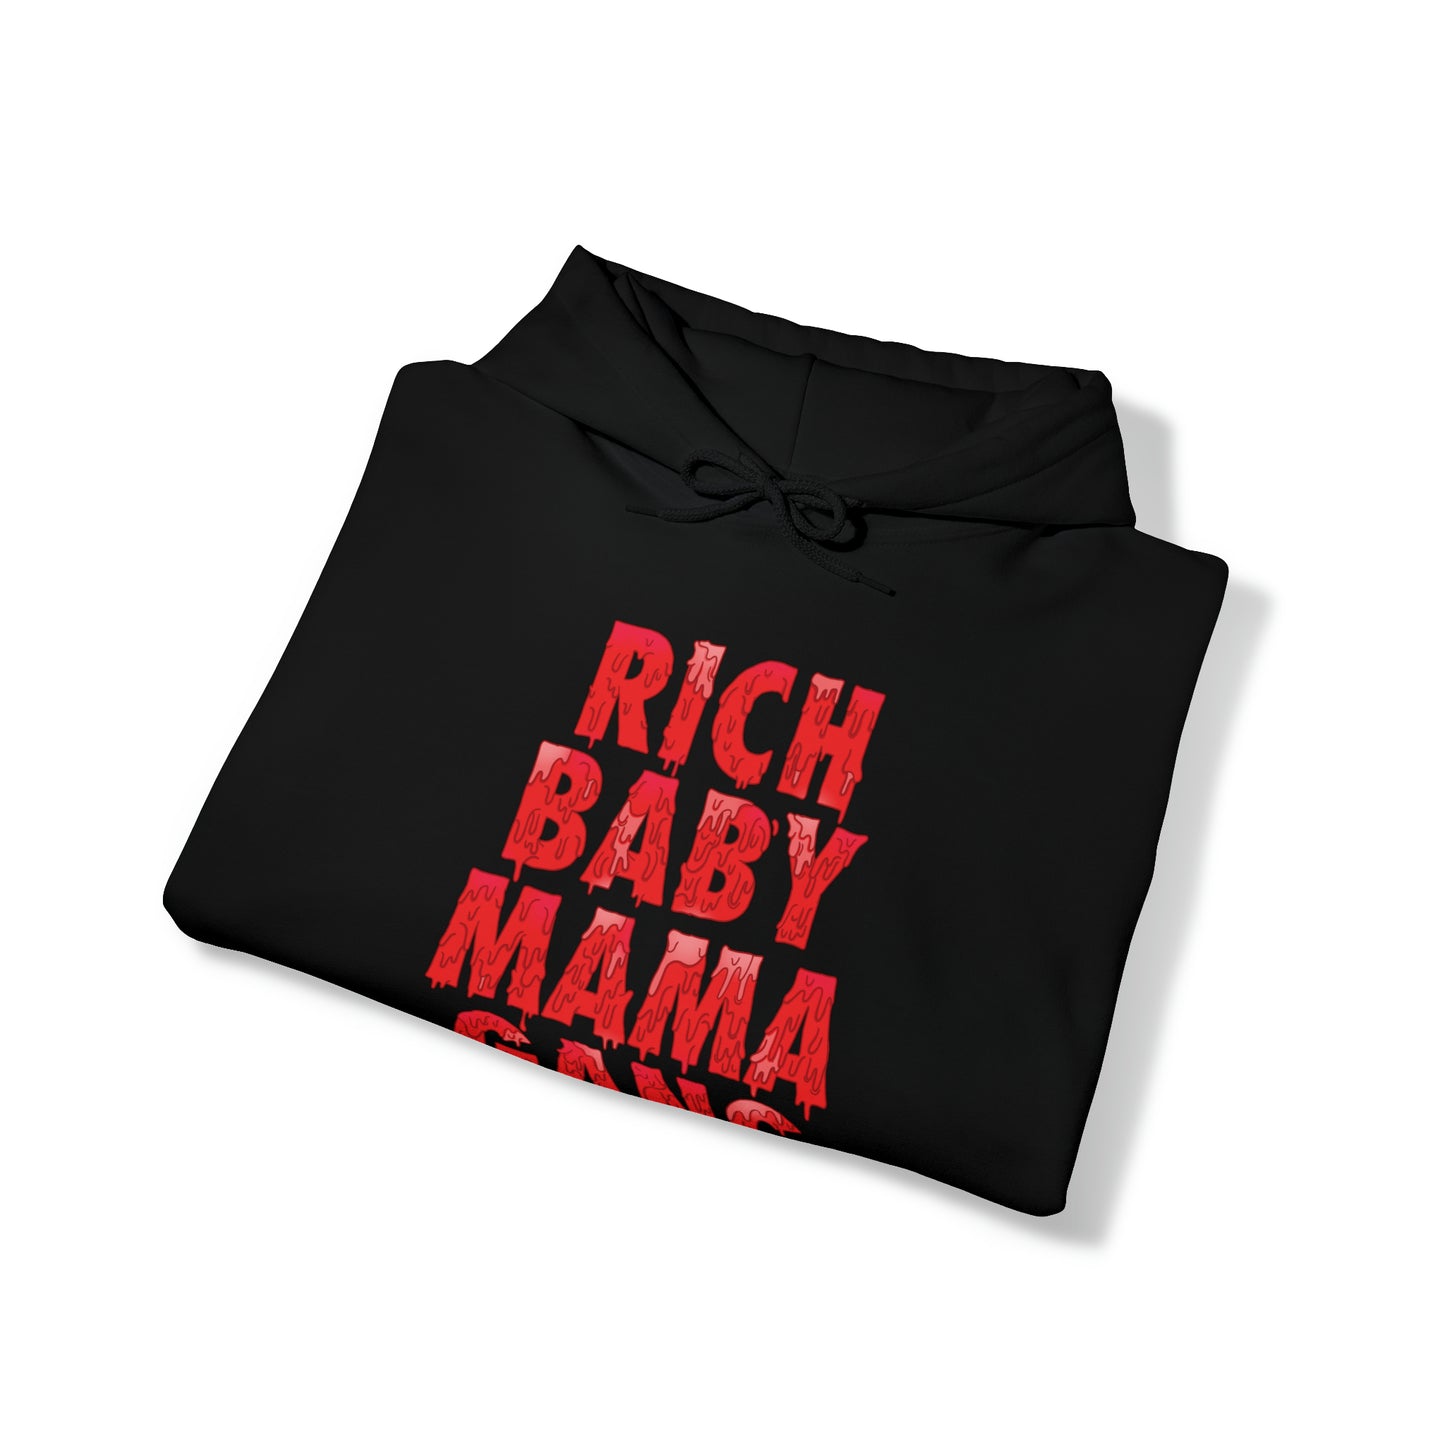 Red Rich Baby Mama Gang $ Hoodie